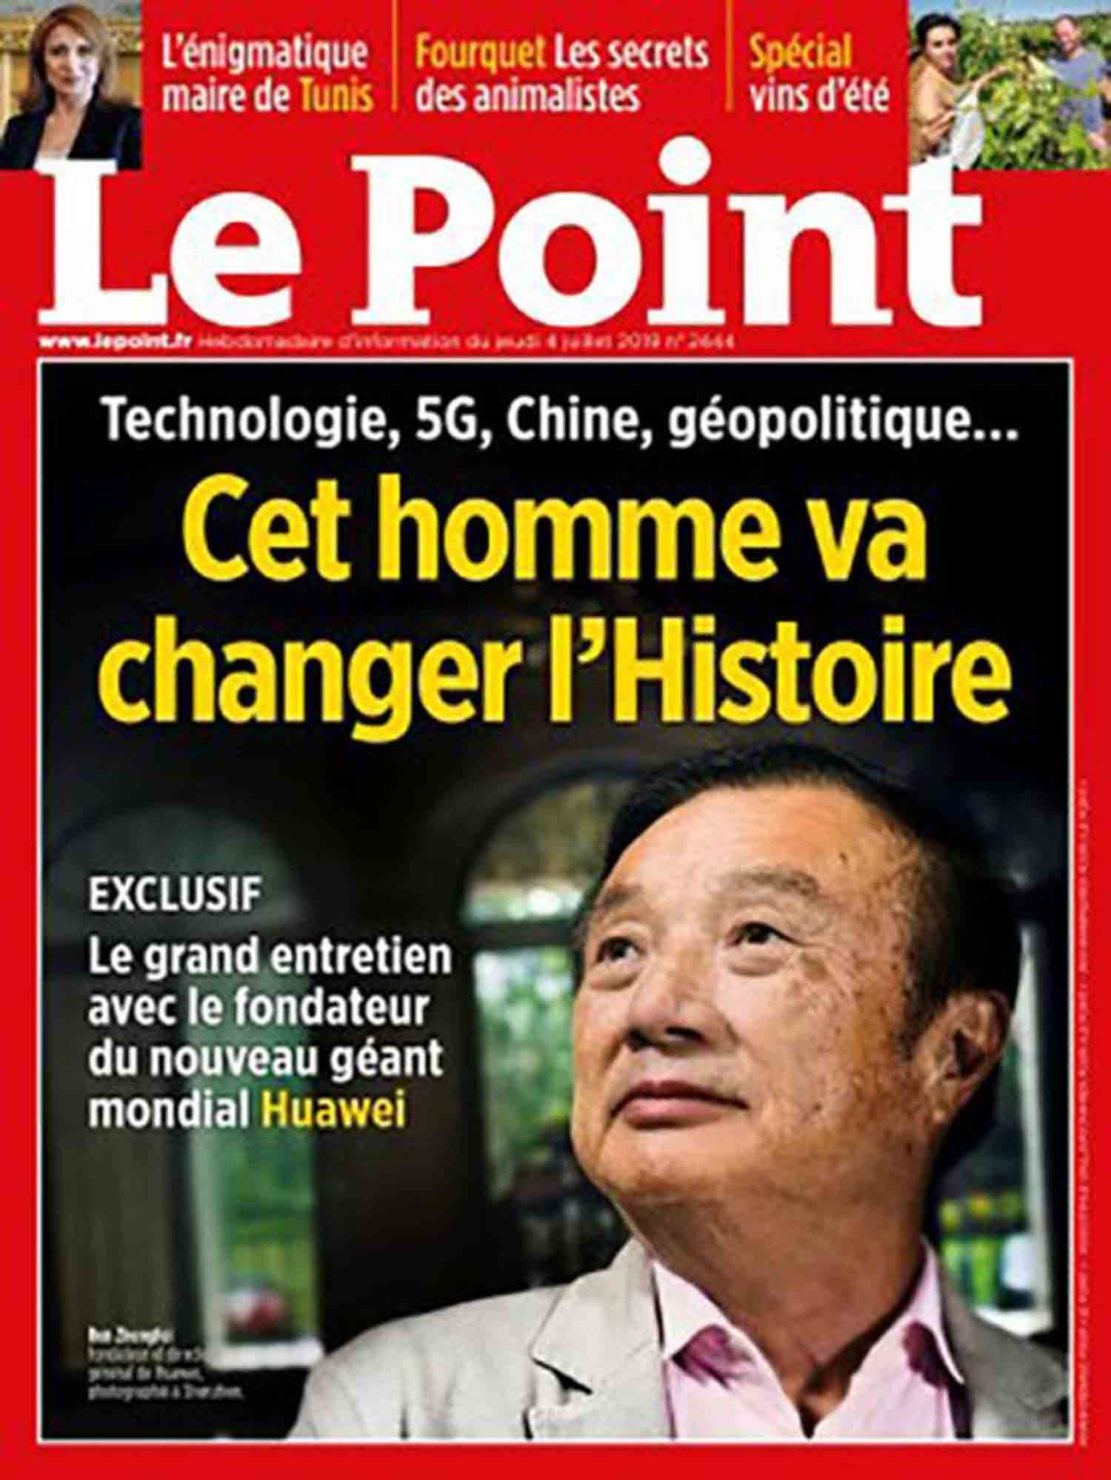 Huawei founder Ren Zhengfei was interviewed for a French magazine - HongMengOS is "likely" faster than Android and iOS says Huawei founder and CEO